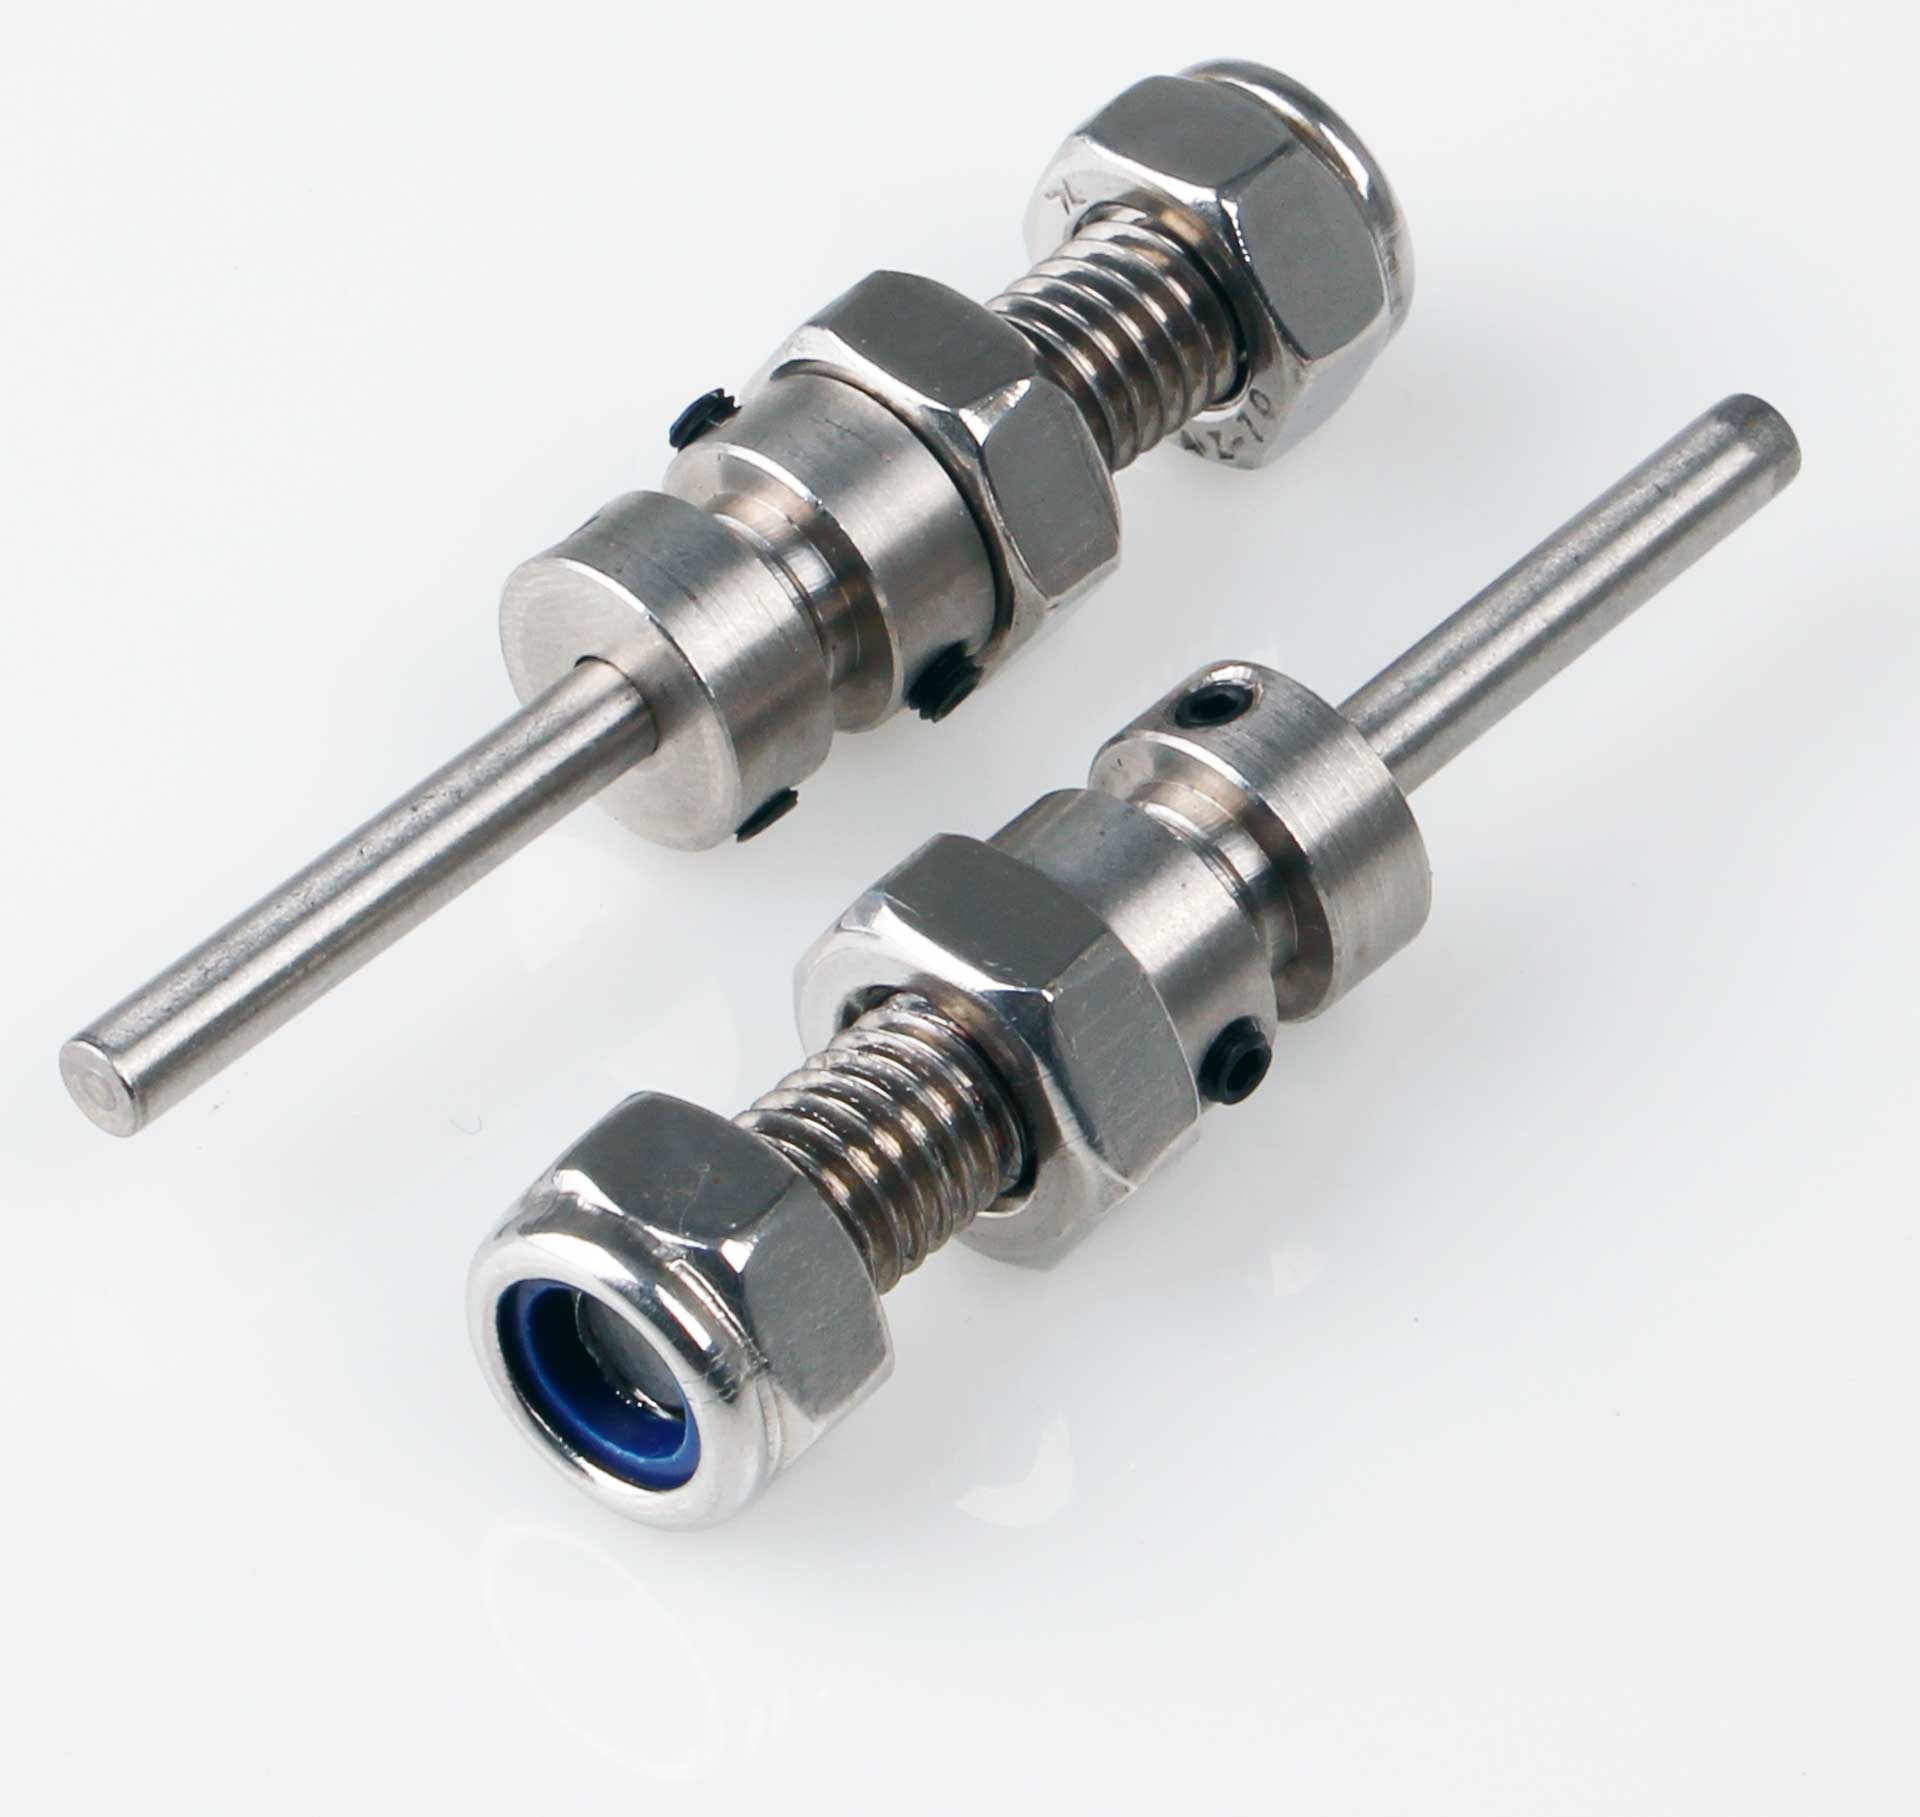 Kuza Wheel axles 4x38mm stainless steel total length 58mm,for 25mm wheel width, 8mm thread 2pcs.